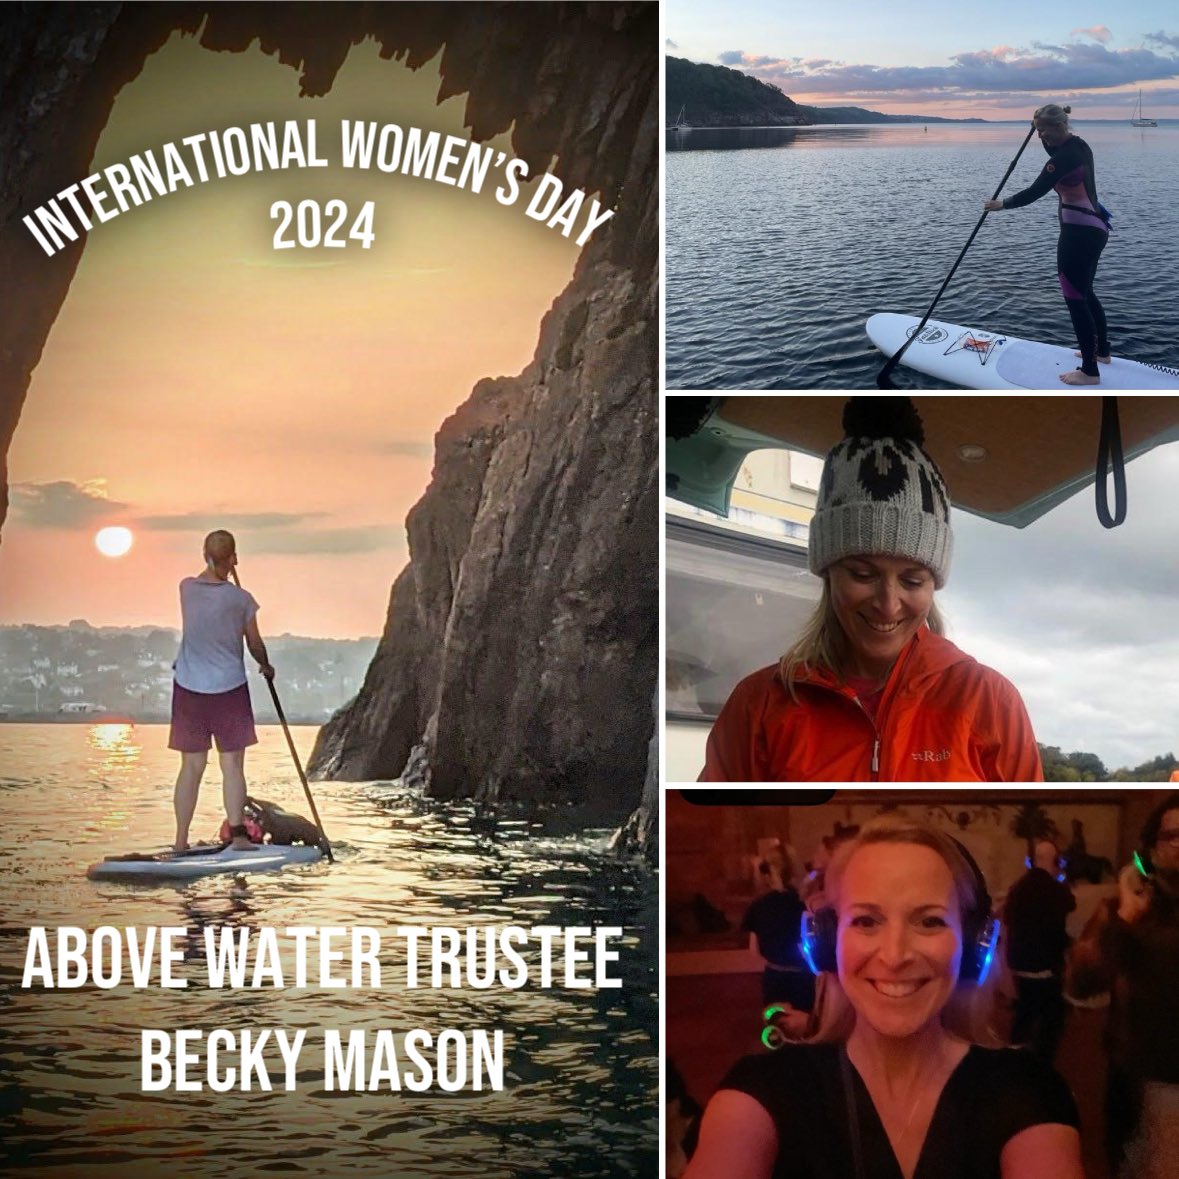 International Women’s Day 2024
We are celebrating our charity Trustee Becky Mason, her knowledge, passion and organisation for promoting water safety is unequaled. A massive thank you for your ever smiley face and enthusiasm to make a difference 👏👏👏 #charitytrustee